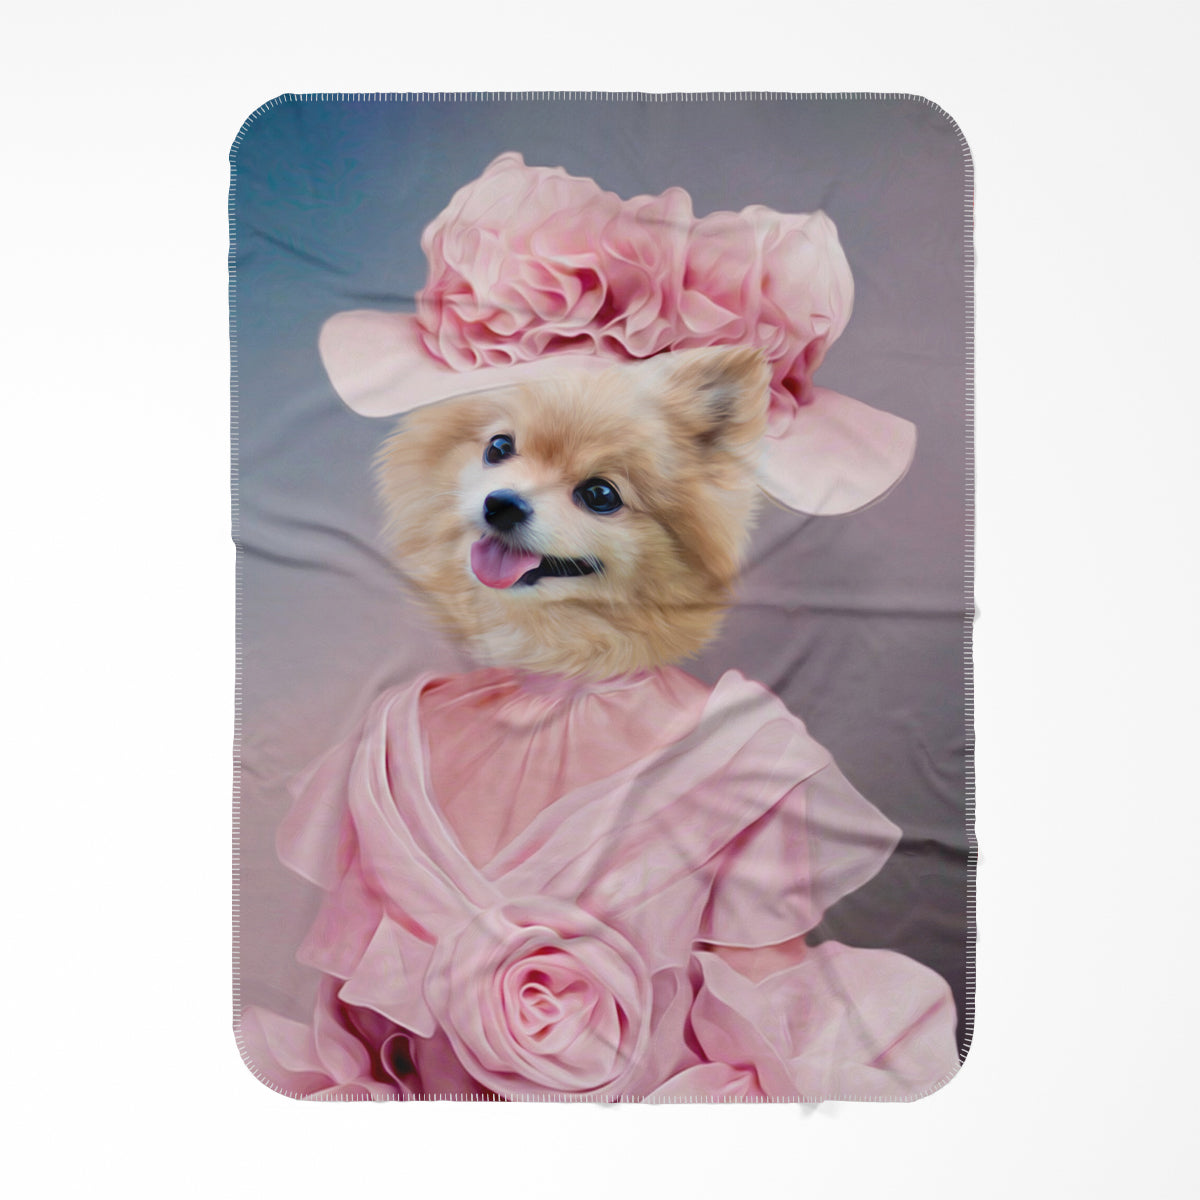 The Southern Belle: Custom Pet Blanket - Paw & Glory - #pet portraits# - #dog portraits# - #pet portraits uk#Pawandglory, Pet art blanket,personalized dog throw blankets, embroidered pet blanket, blanket for my dog, dog blankets online, dog pet blanket